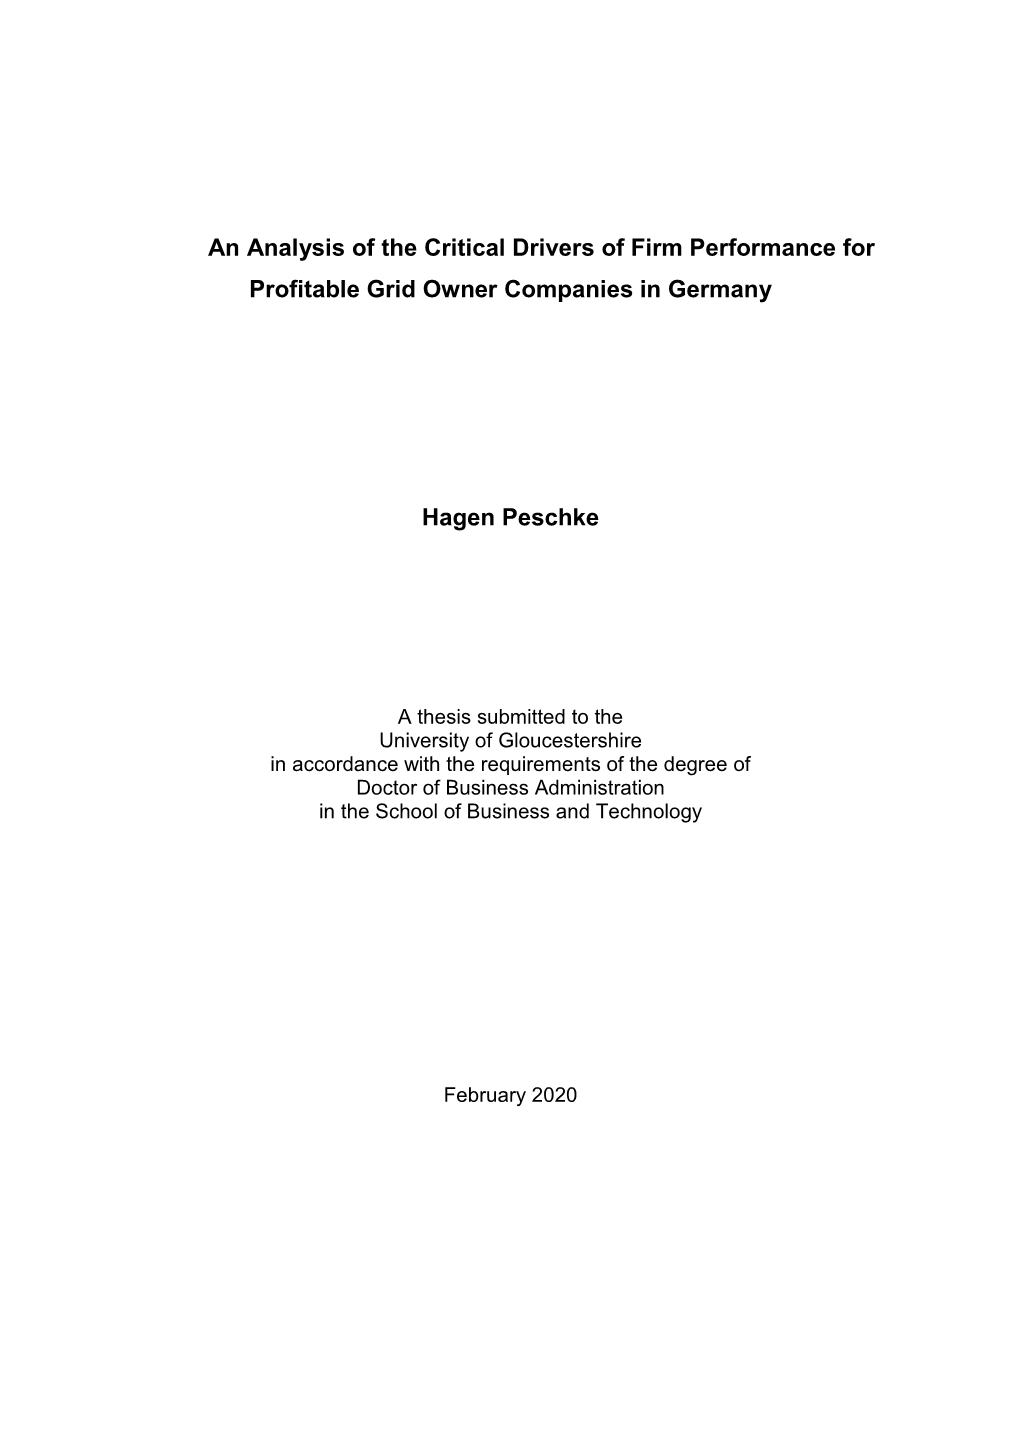 An Analysis of the Critical Drivers of Firm Performance for Profitable Grid Owner Companies in Germany